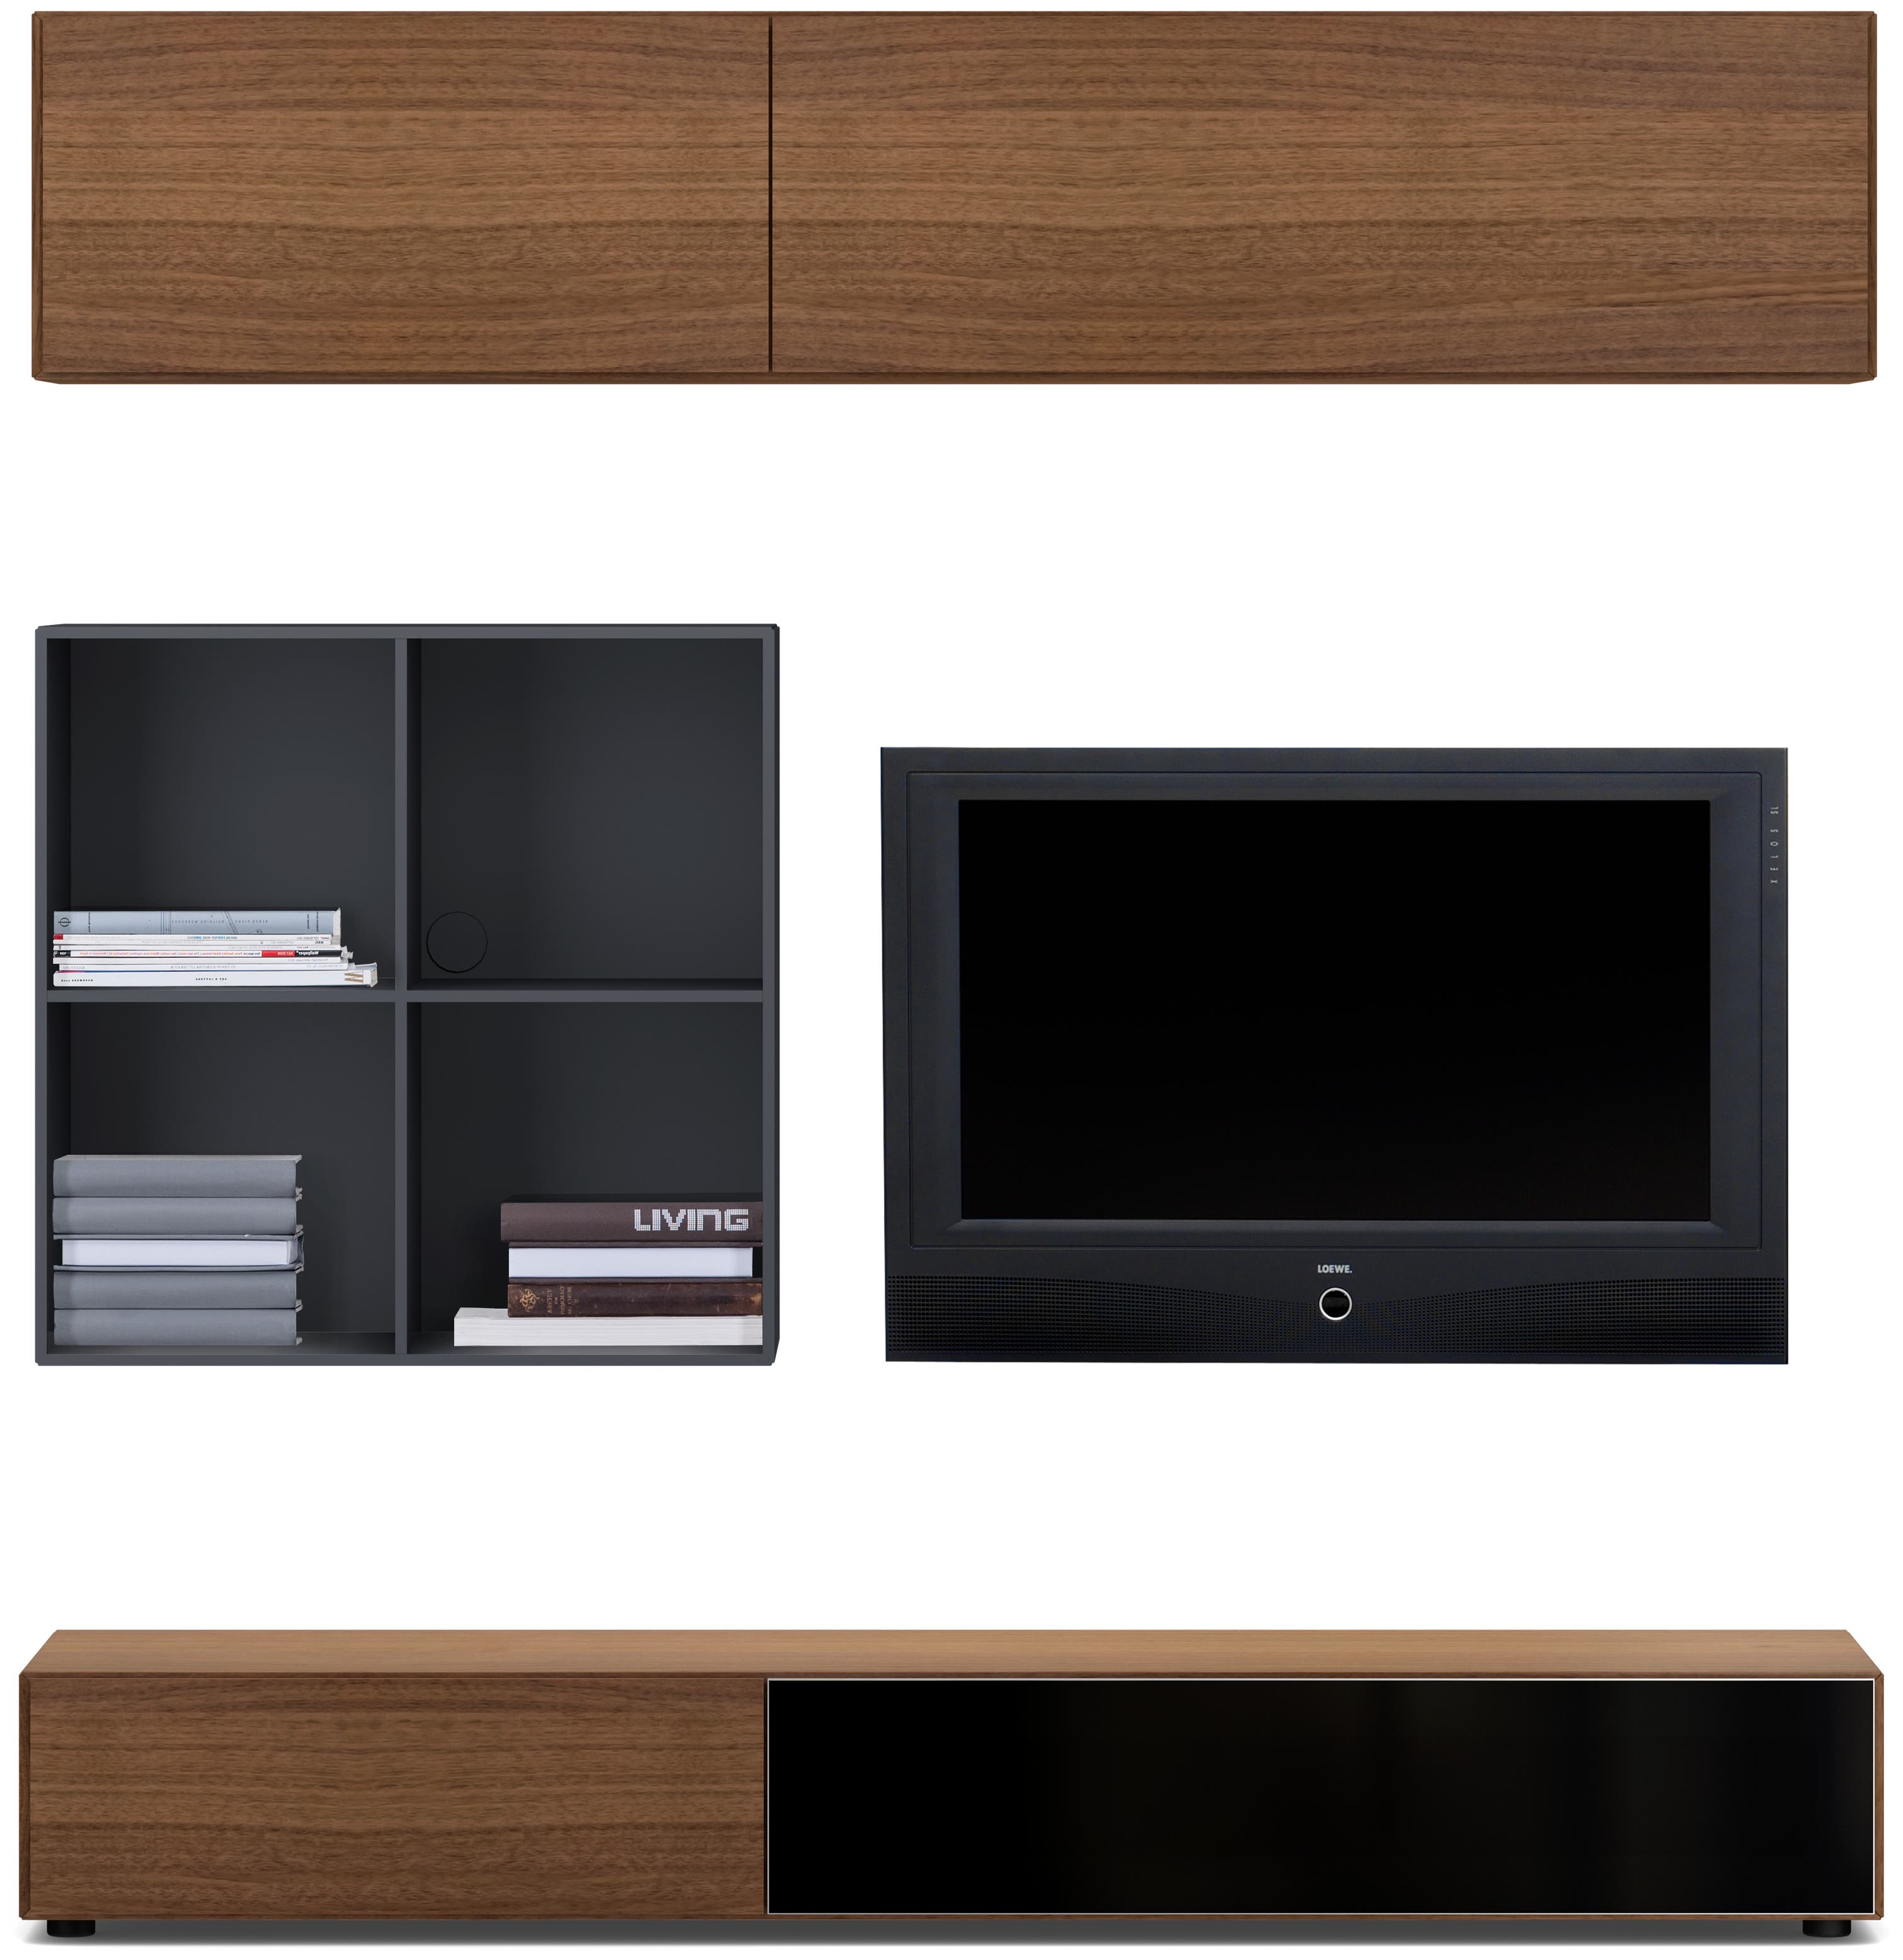 Lugano wall system with drawer, drop down and flip up doors